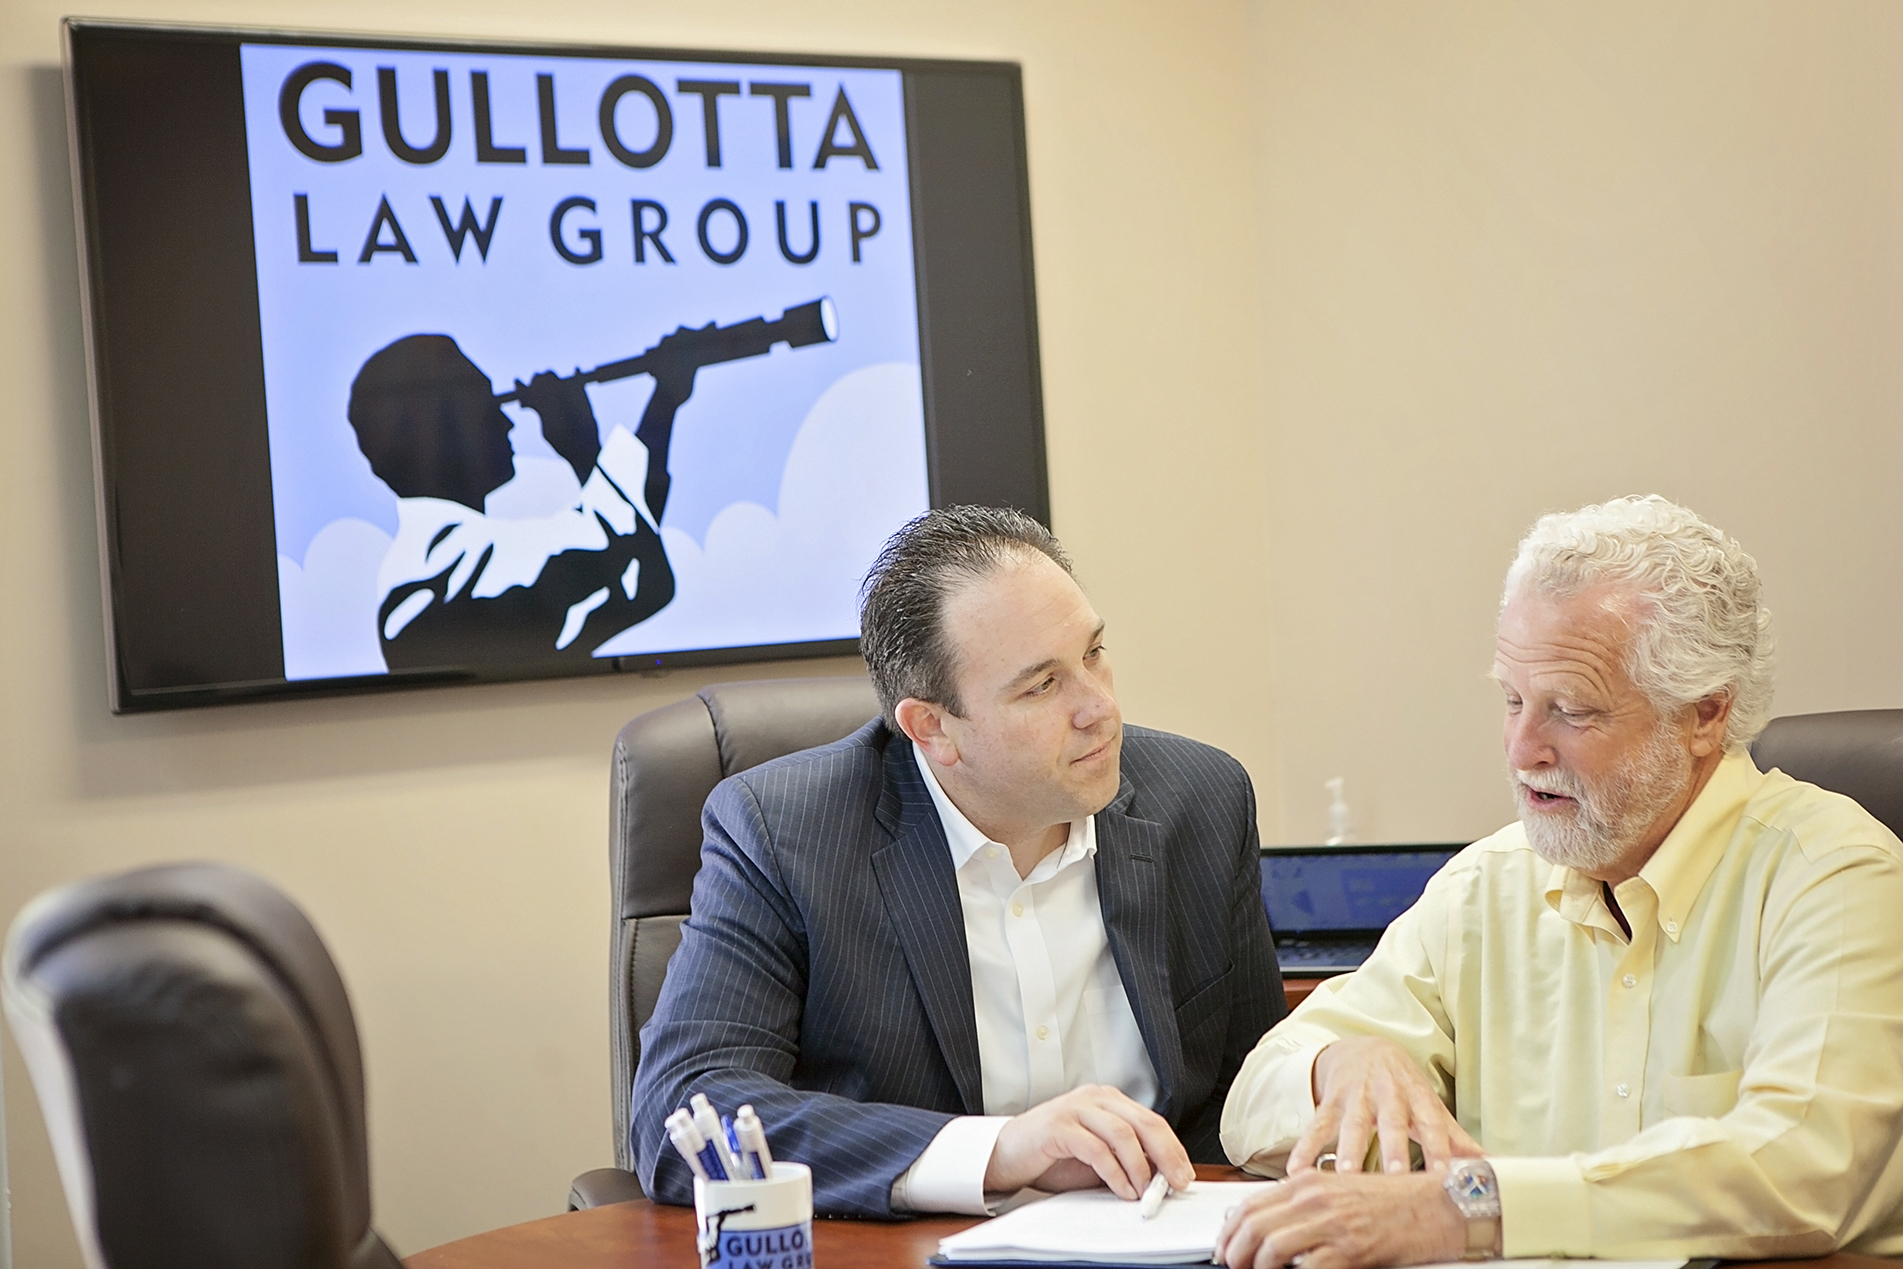 Meeting at the Gullotta Law Group Office